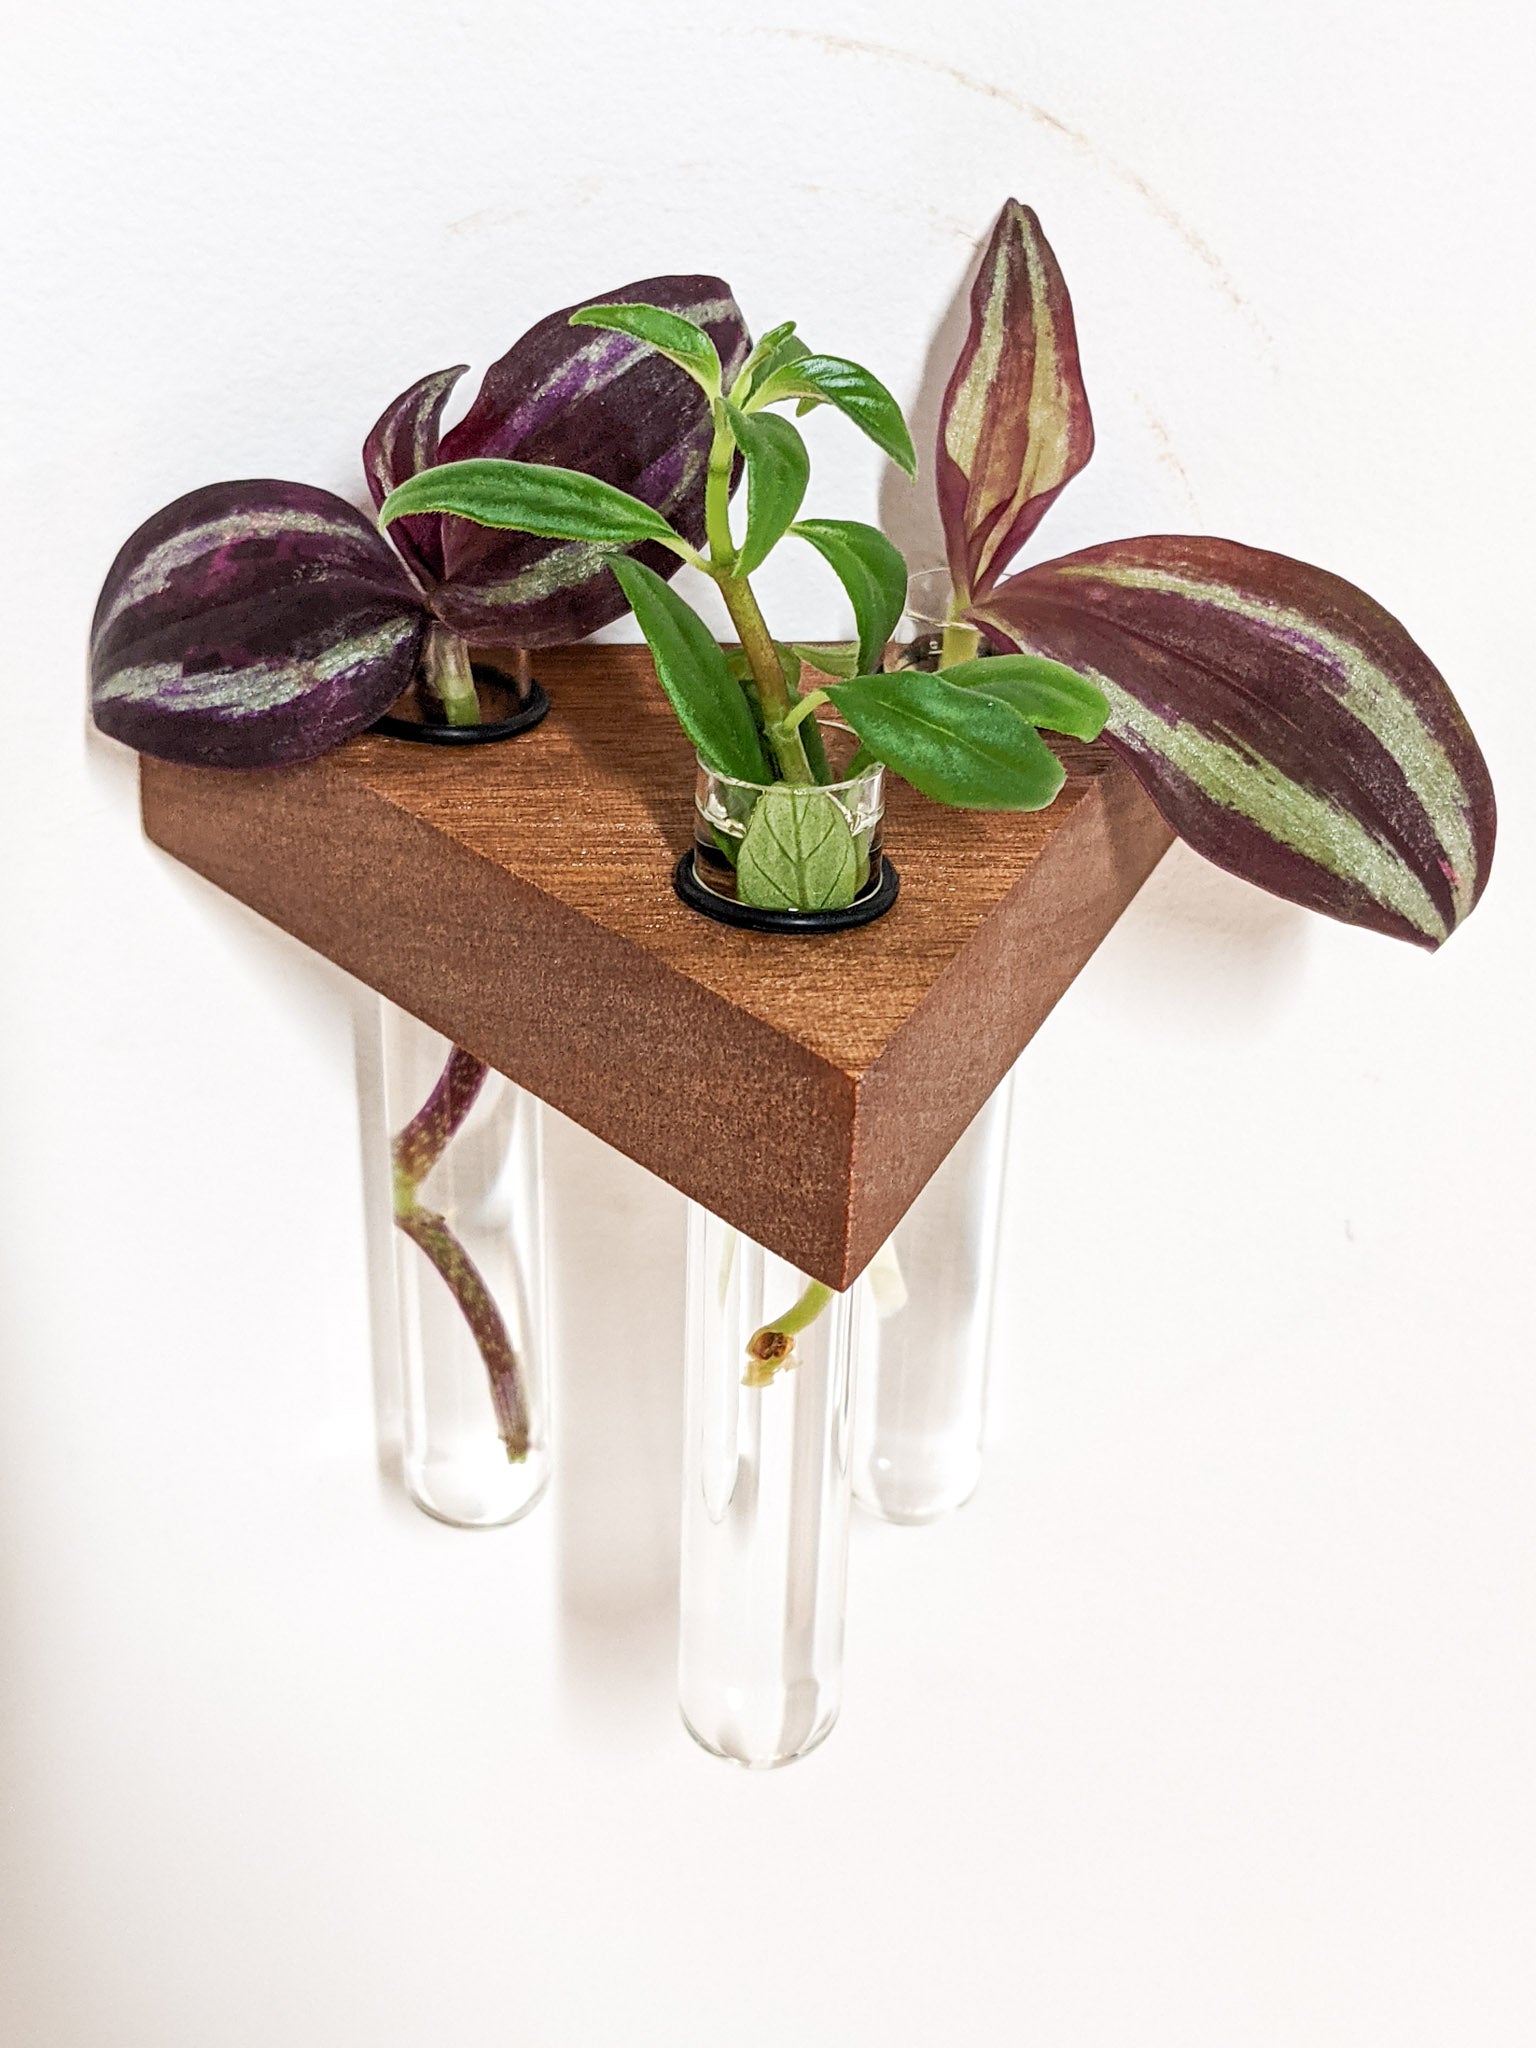 A head-on view of the mahogany triangle propagation shelf. The mahogany is smooth and dark brown with crisp sides. 4 glass test tubes are filled with green and purple cuttings. 